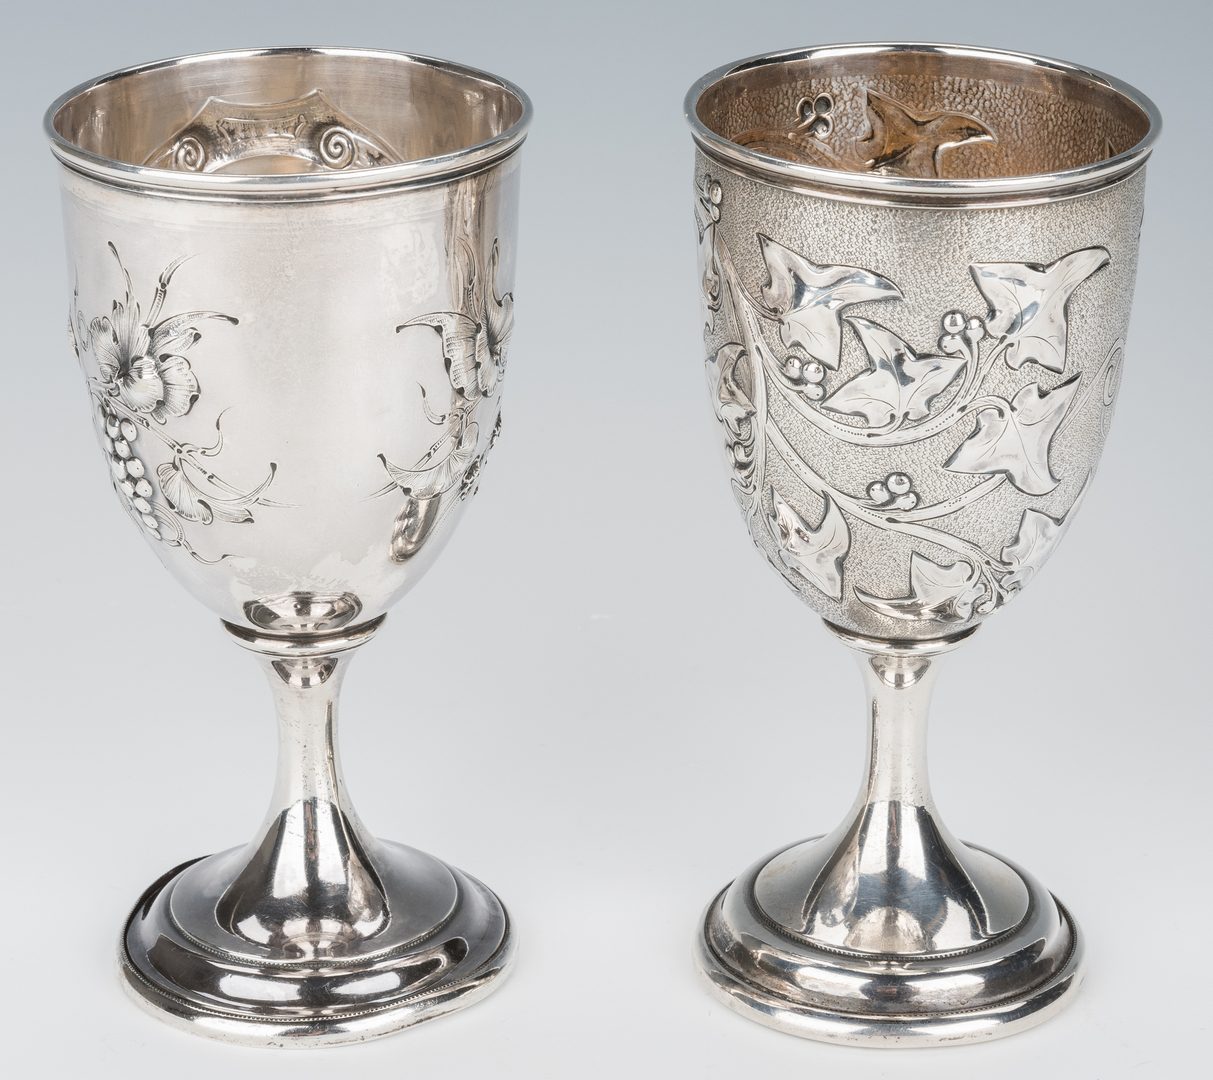 Lot 207: 3 Coin Silver Goblets, Marshall Family History